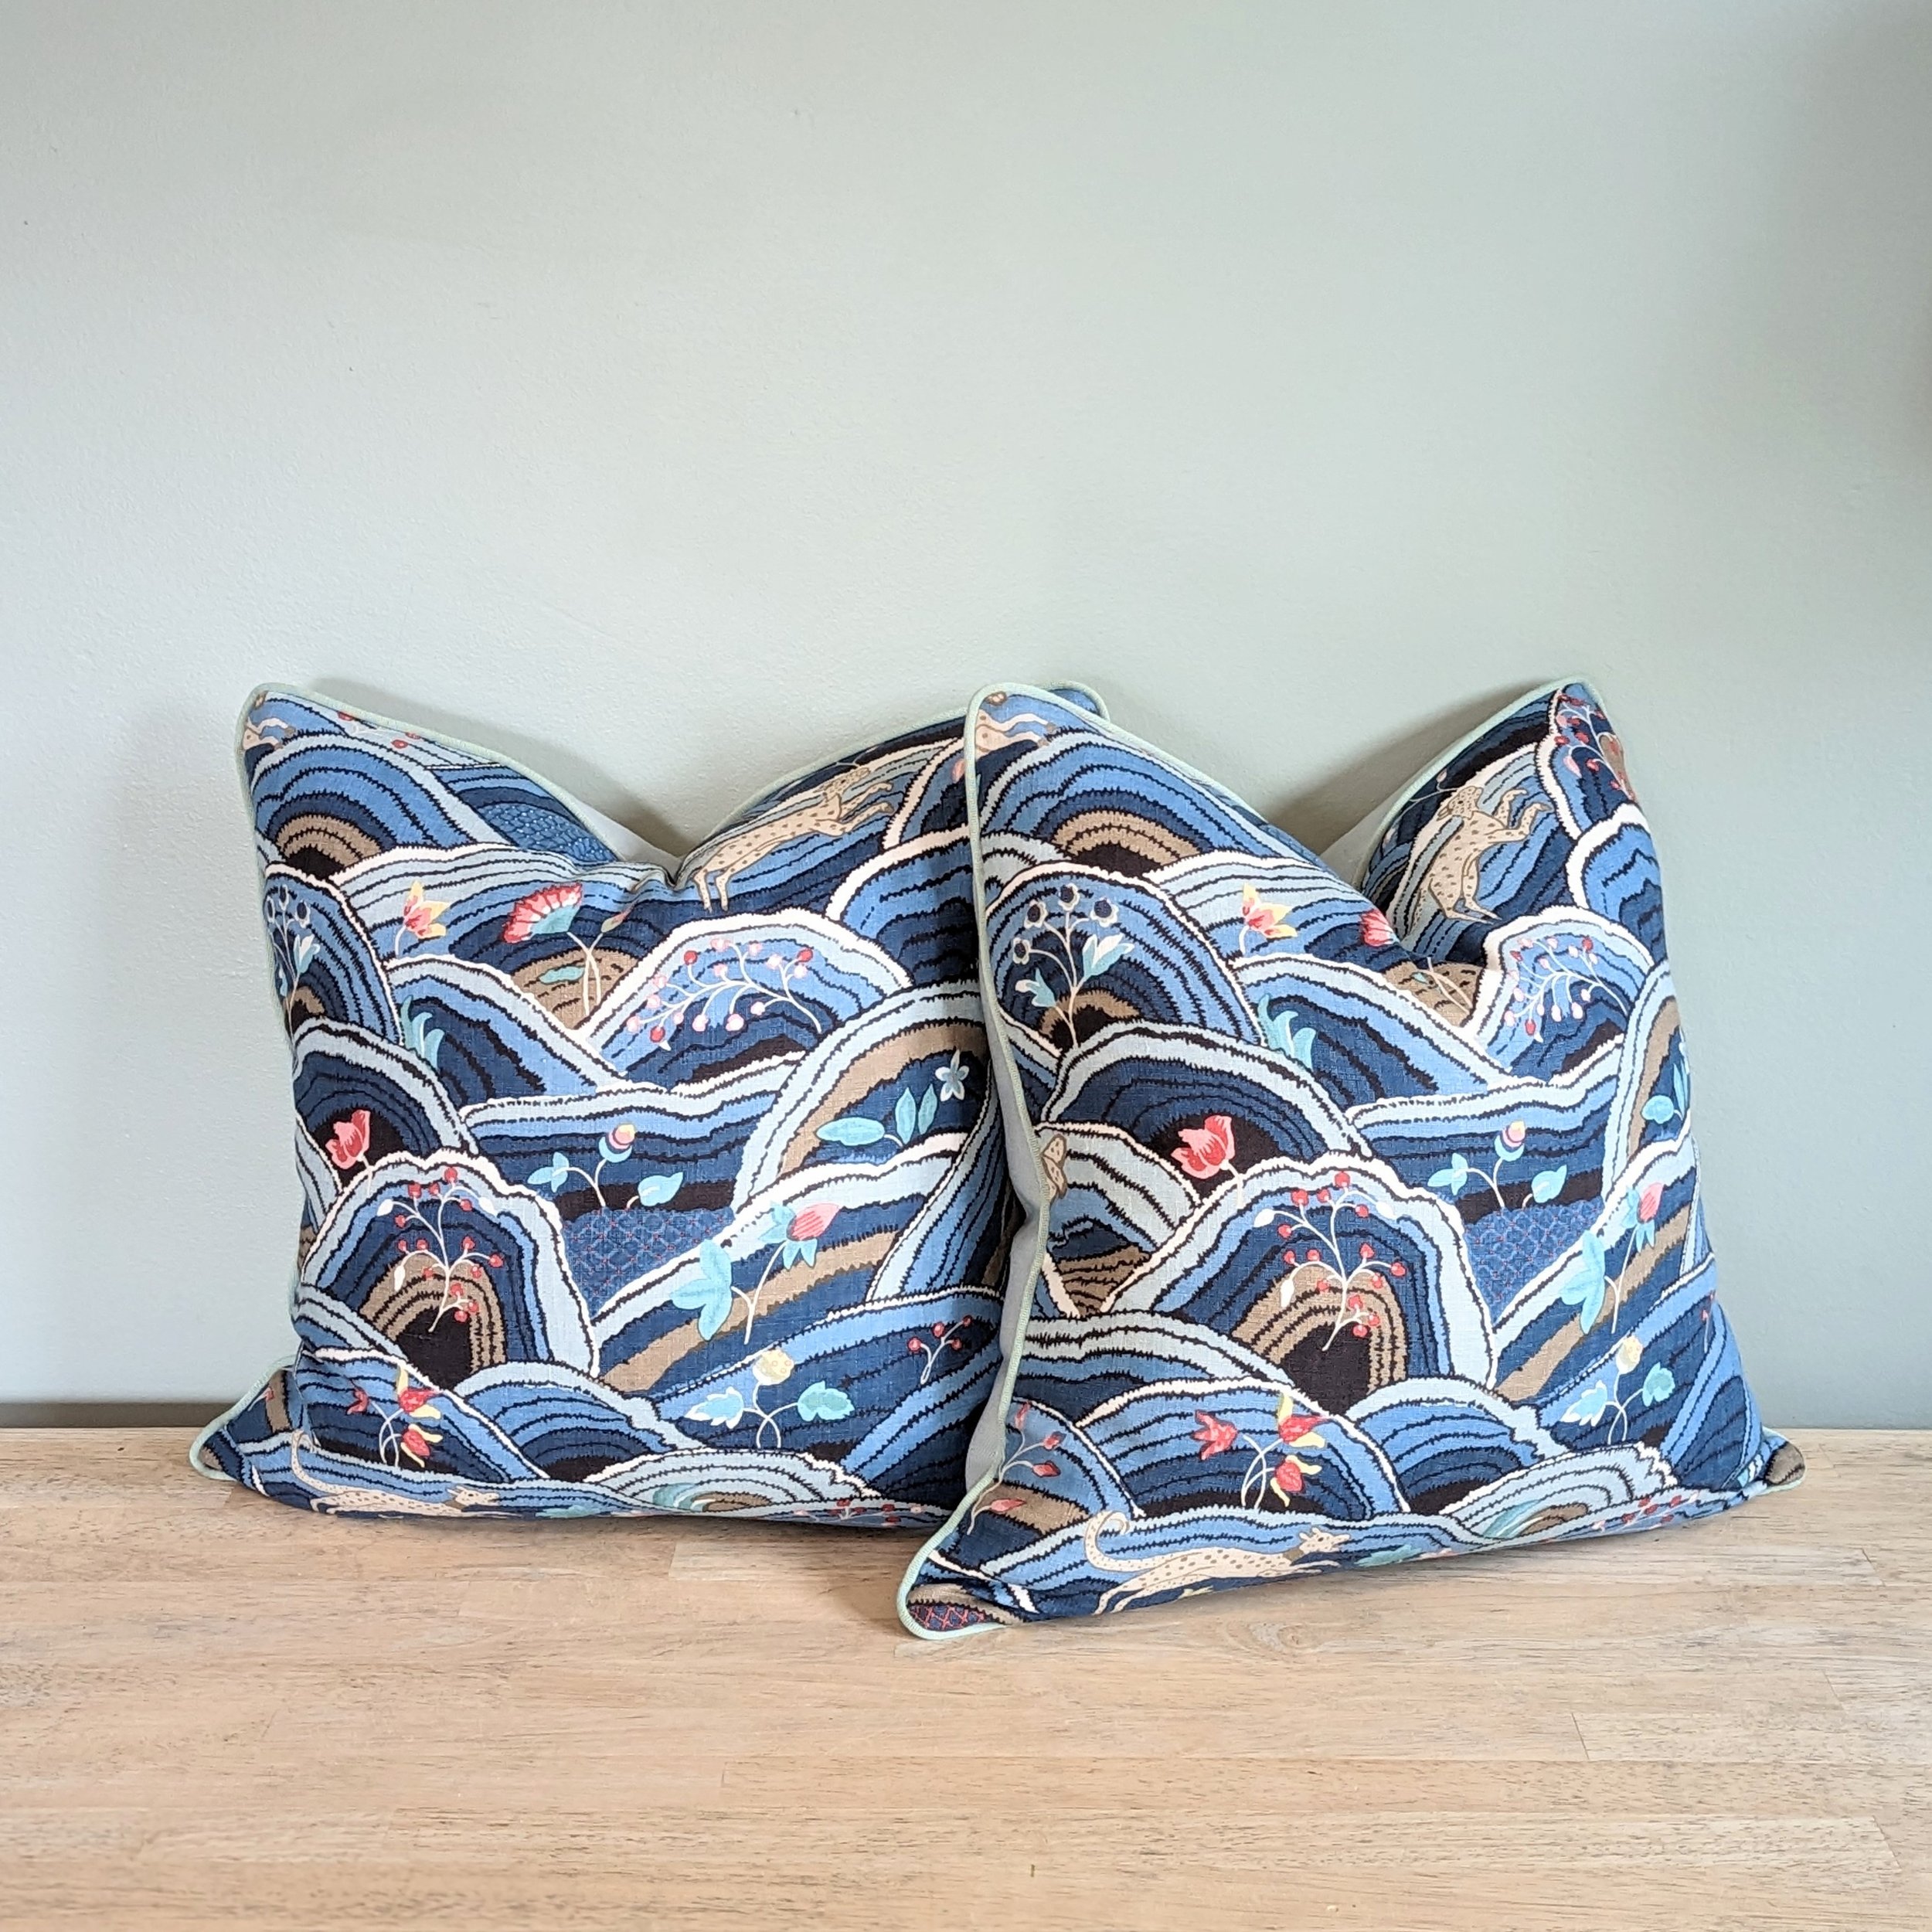 Schumacher Blue rolling hills pillows — Styled with Navy